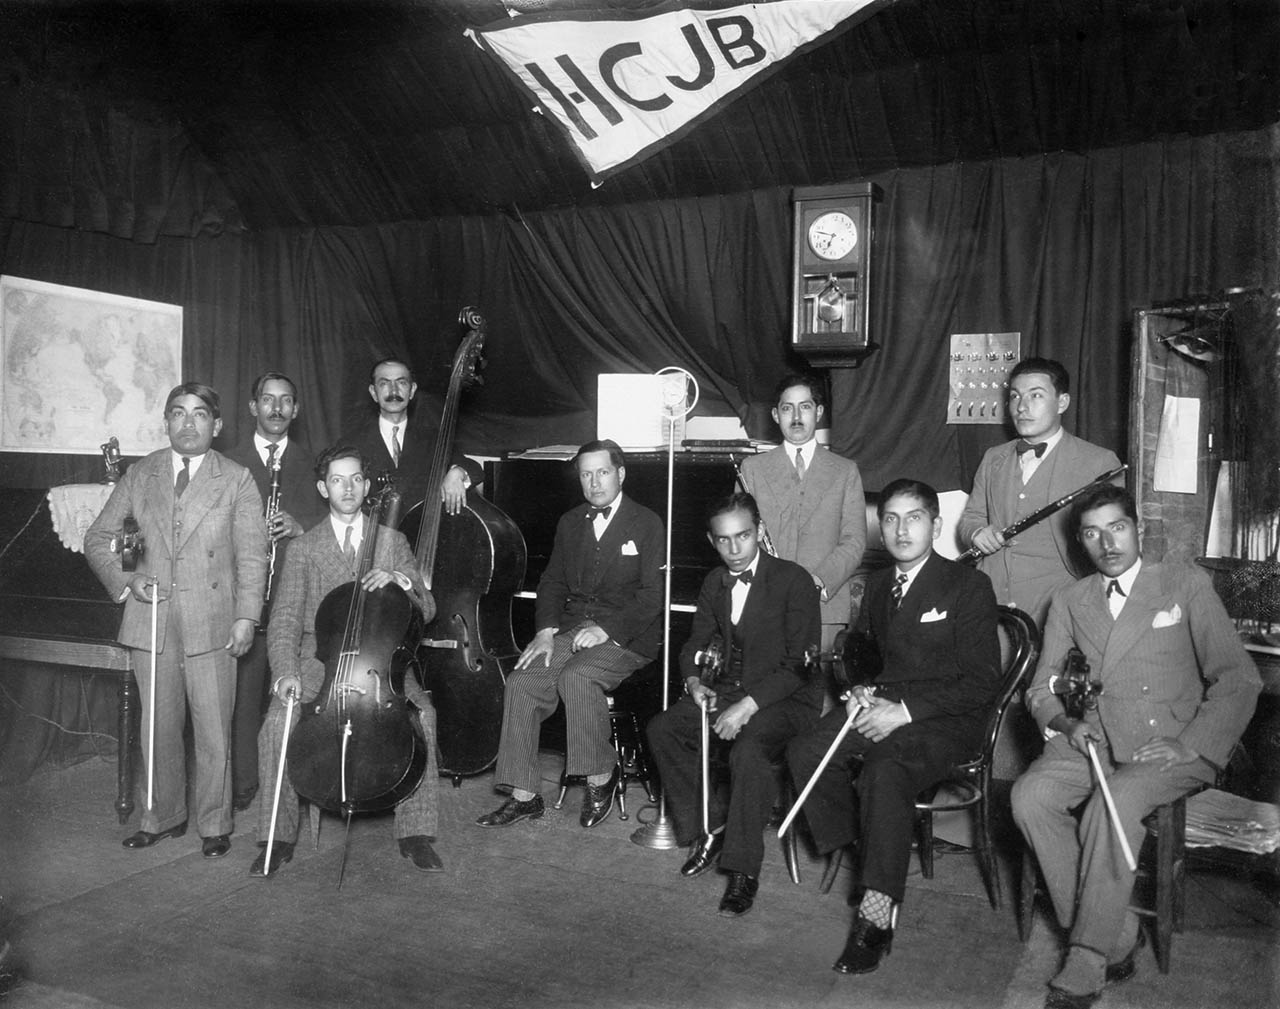 The Vozandes Orchestra - Clarence hired the best musicians he could find to perform live music on Radio Station HCJB